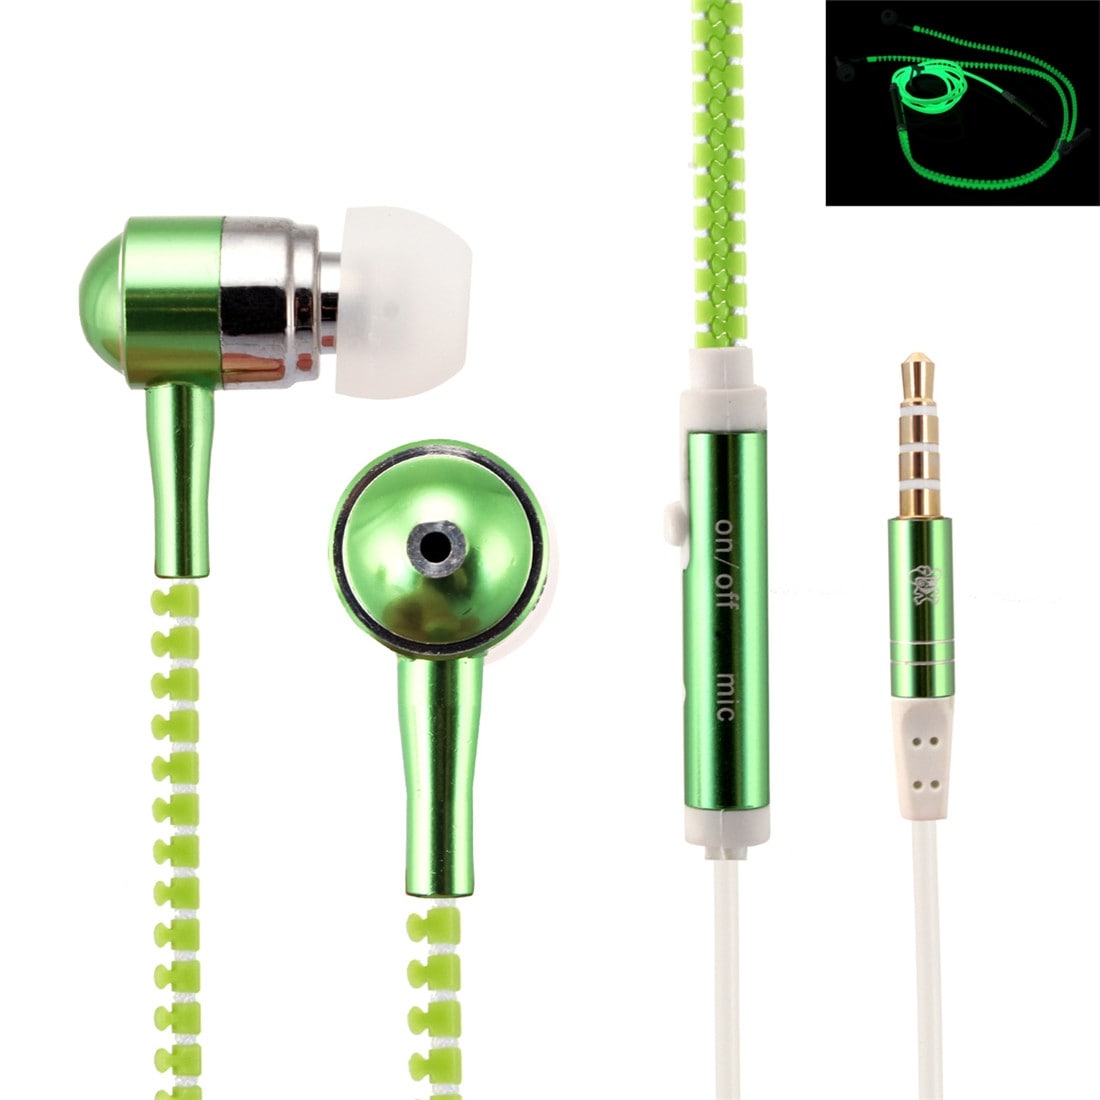 Selvlysende In-Ear Headset til iPhone, iPad, Samsung, HTC, Sony m.m.